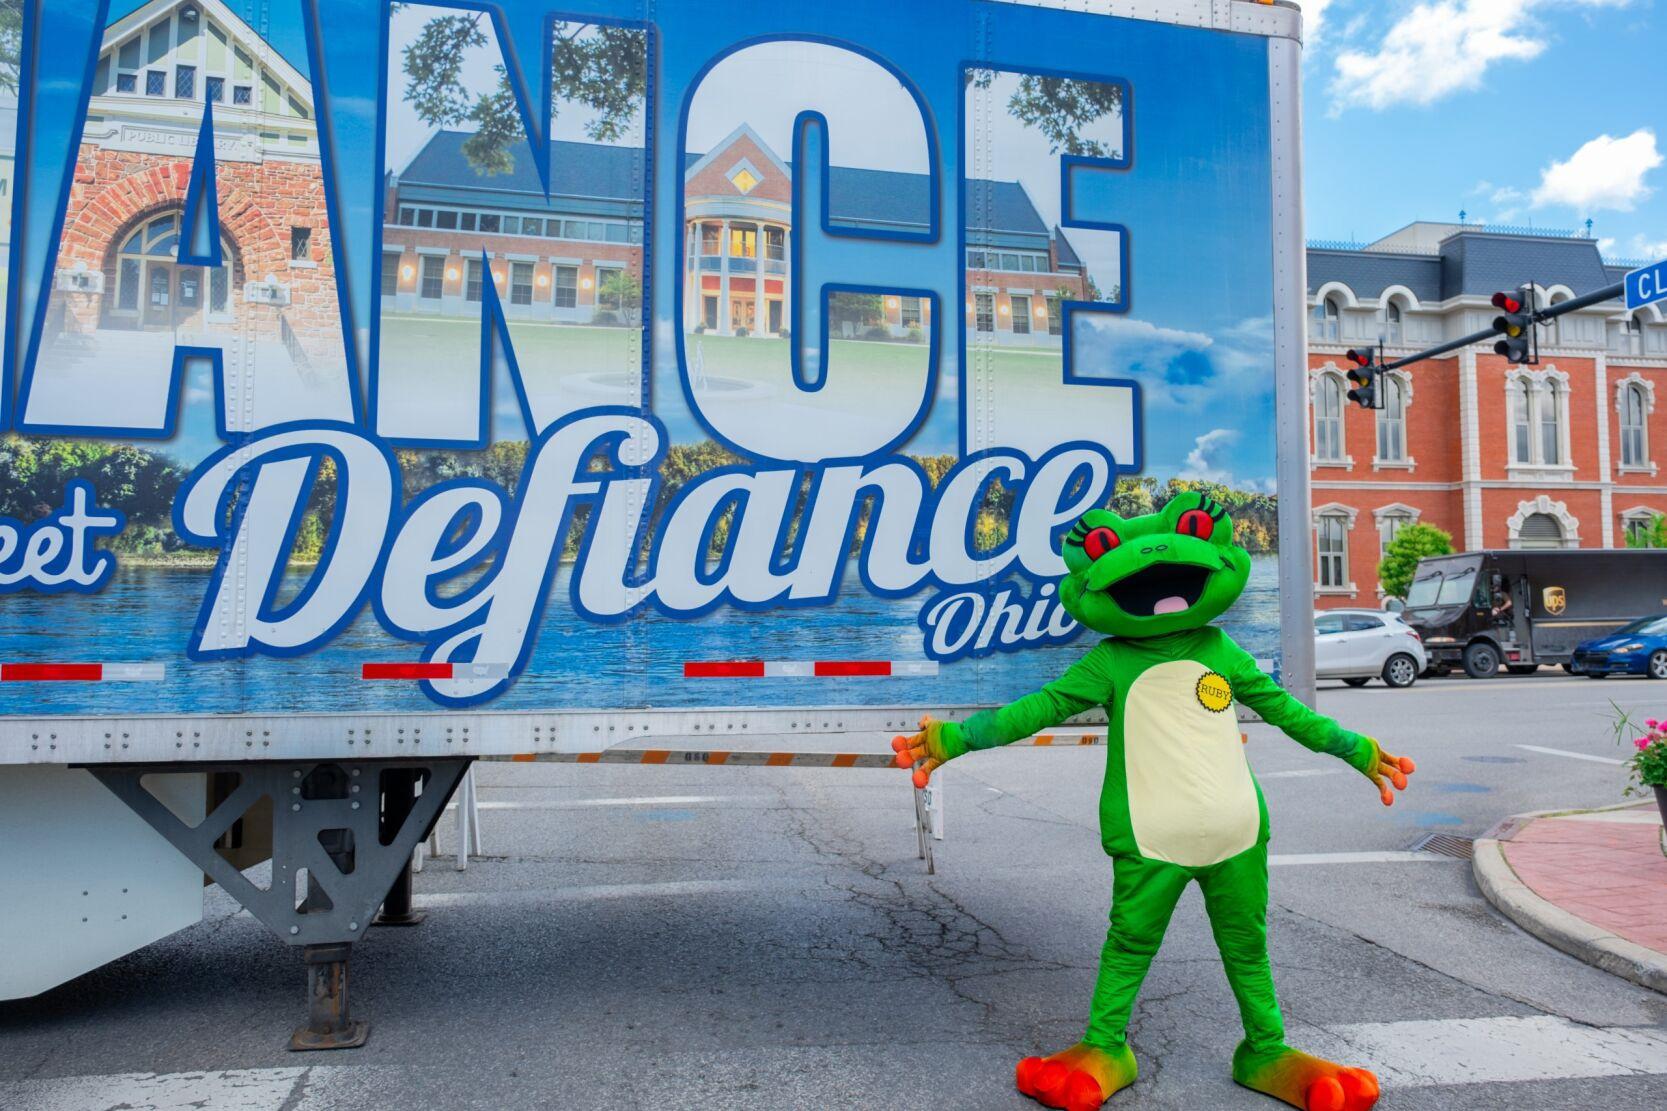 Station mascot Ruby the Red-eyed Tree Frog in front of Defiance Ohio mural